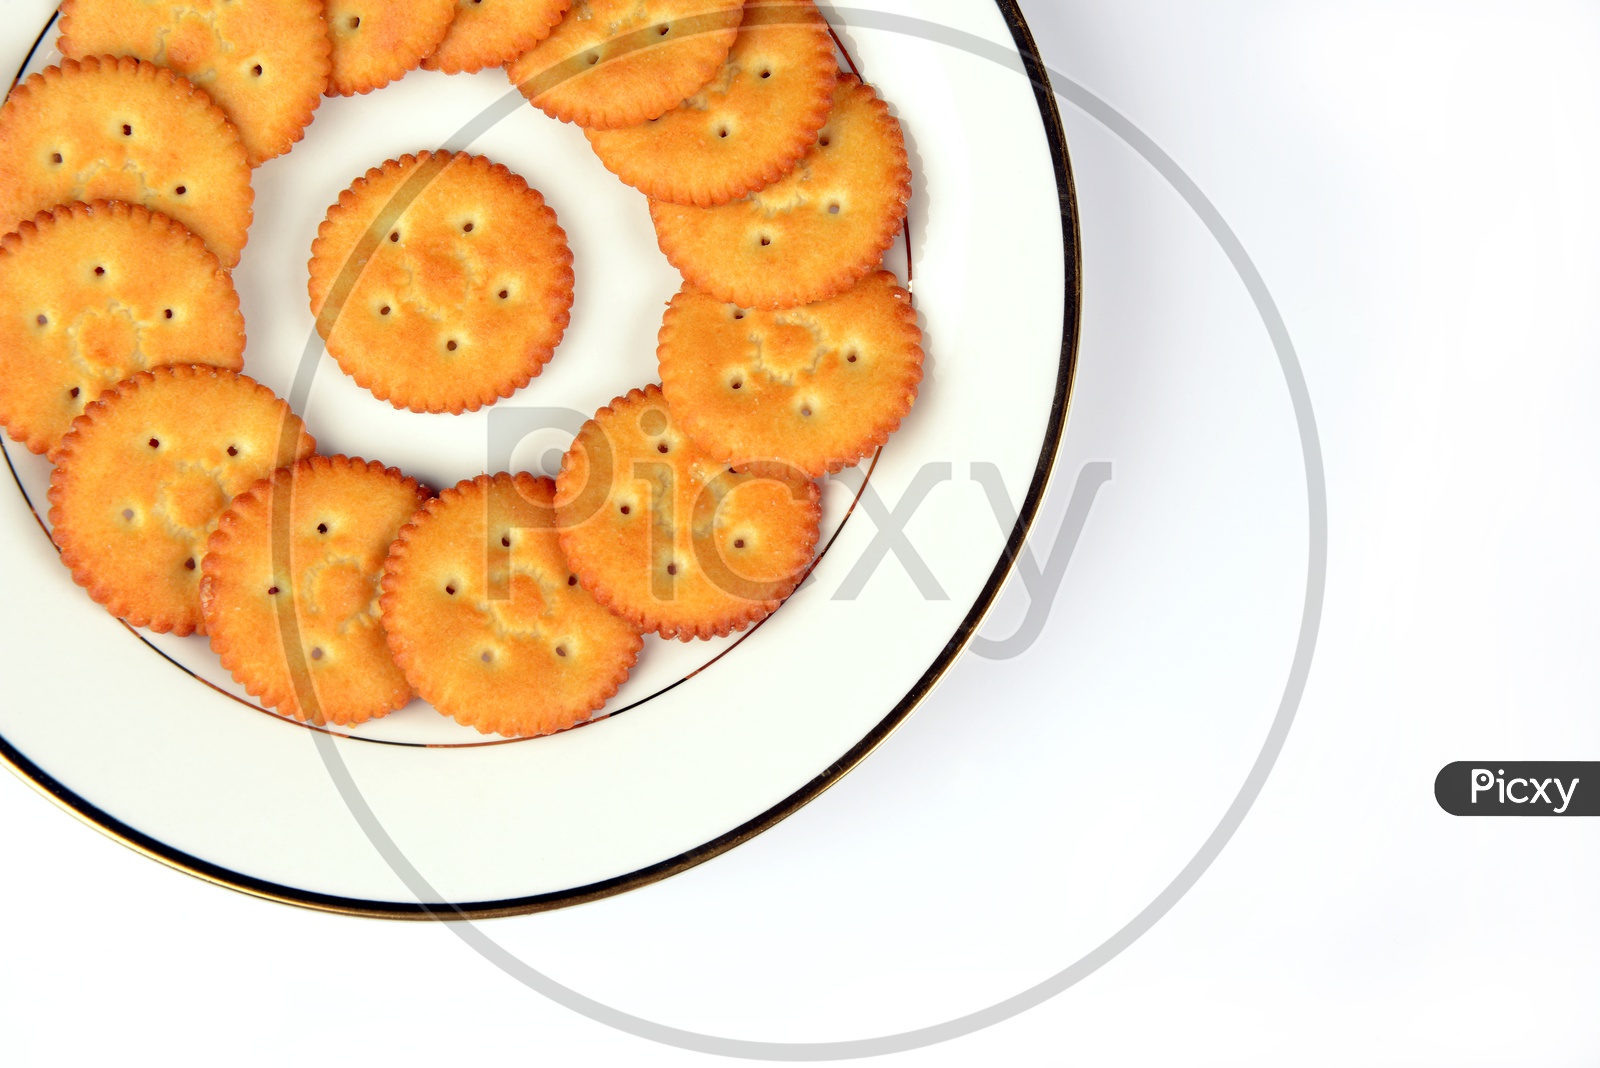 Salty cookies or biscuits  in a plate on White baground